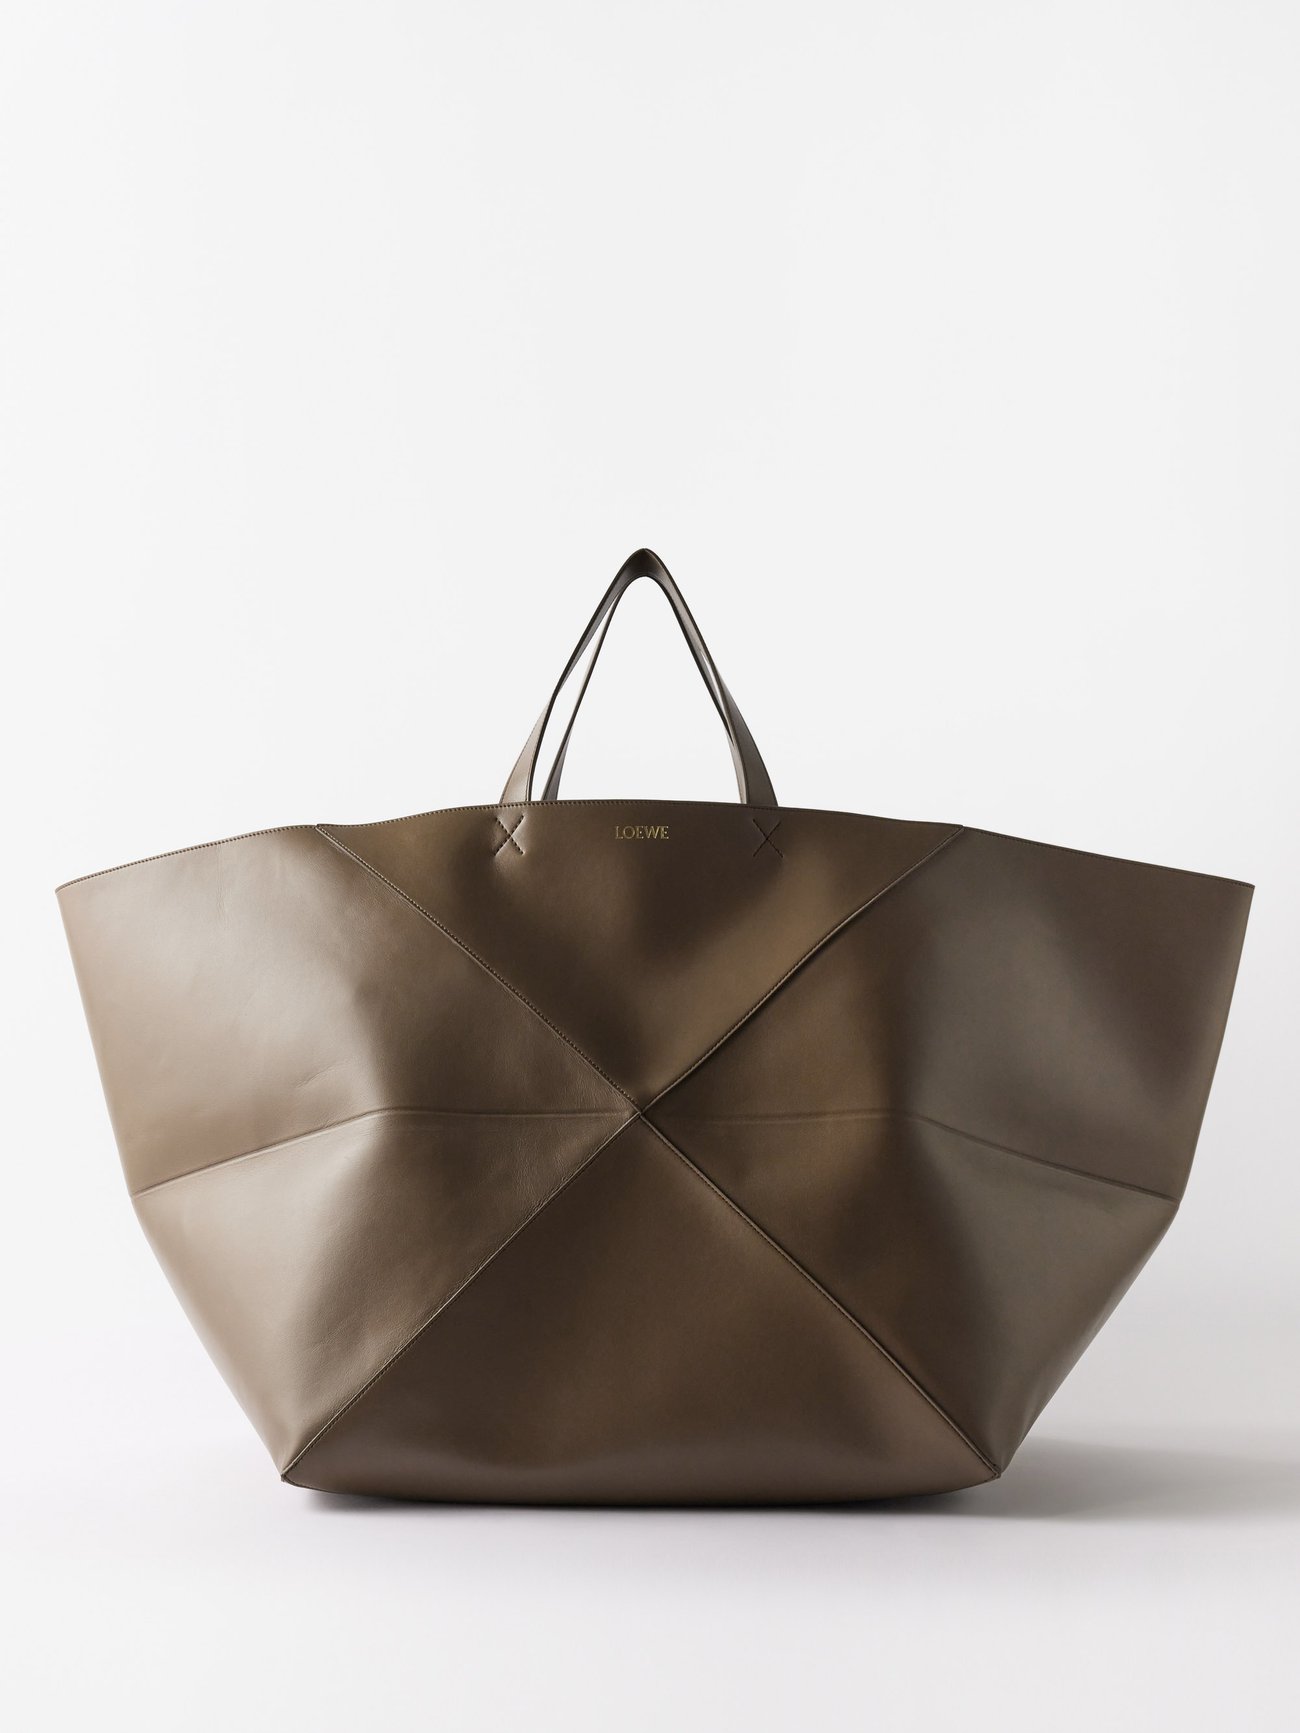 Paul Smith, Bags, Paul Smith Packable Travel Tote Bag